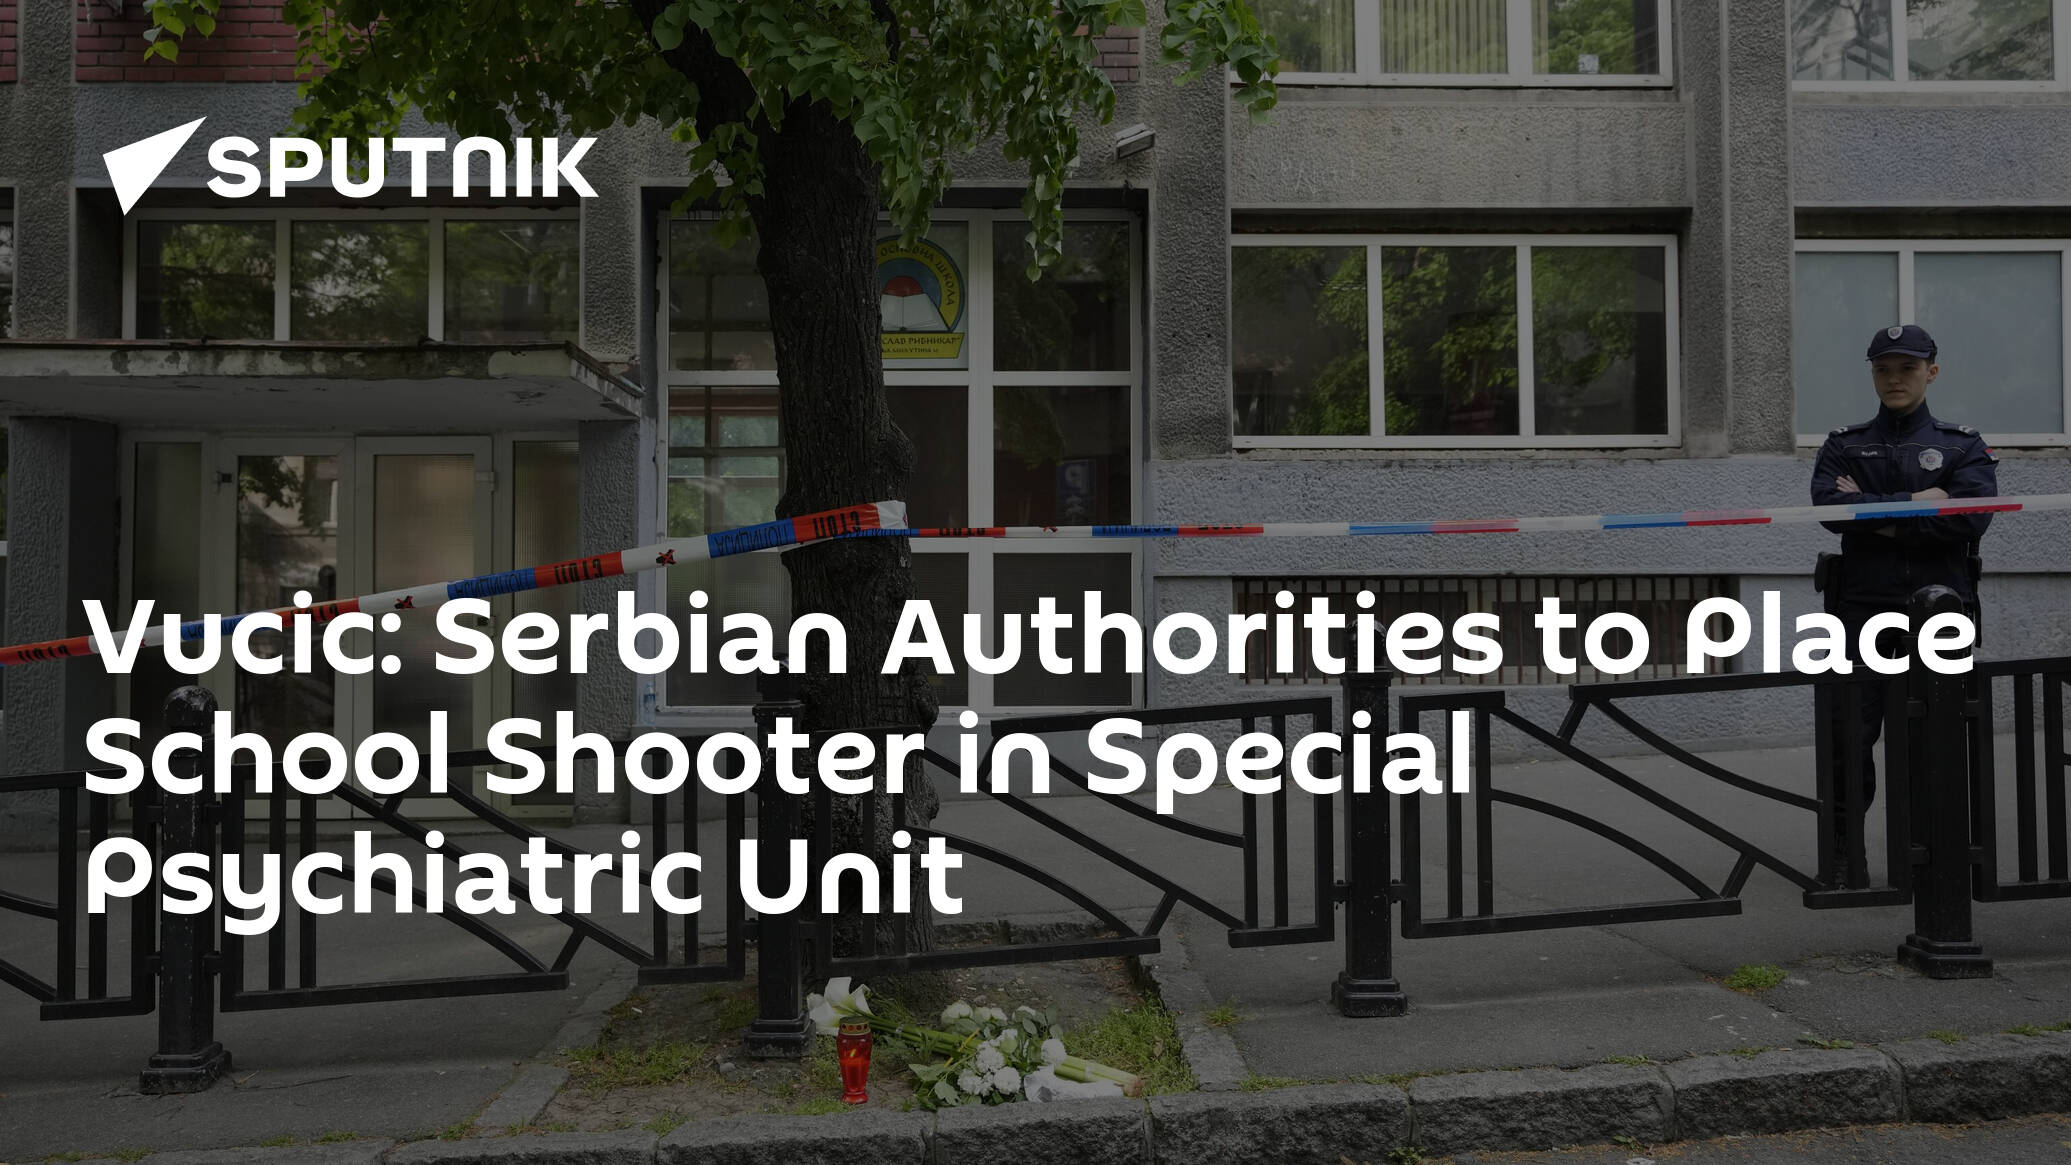 Vucic: Serbian Authorities to Place School Shooter in Special Psychiatric Unit